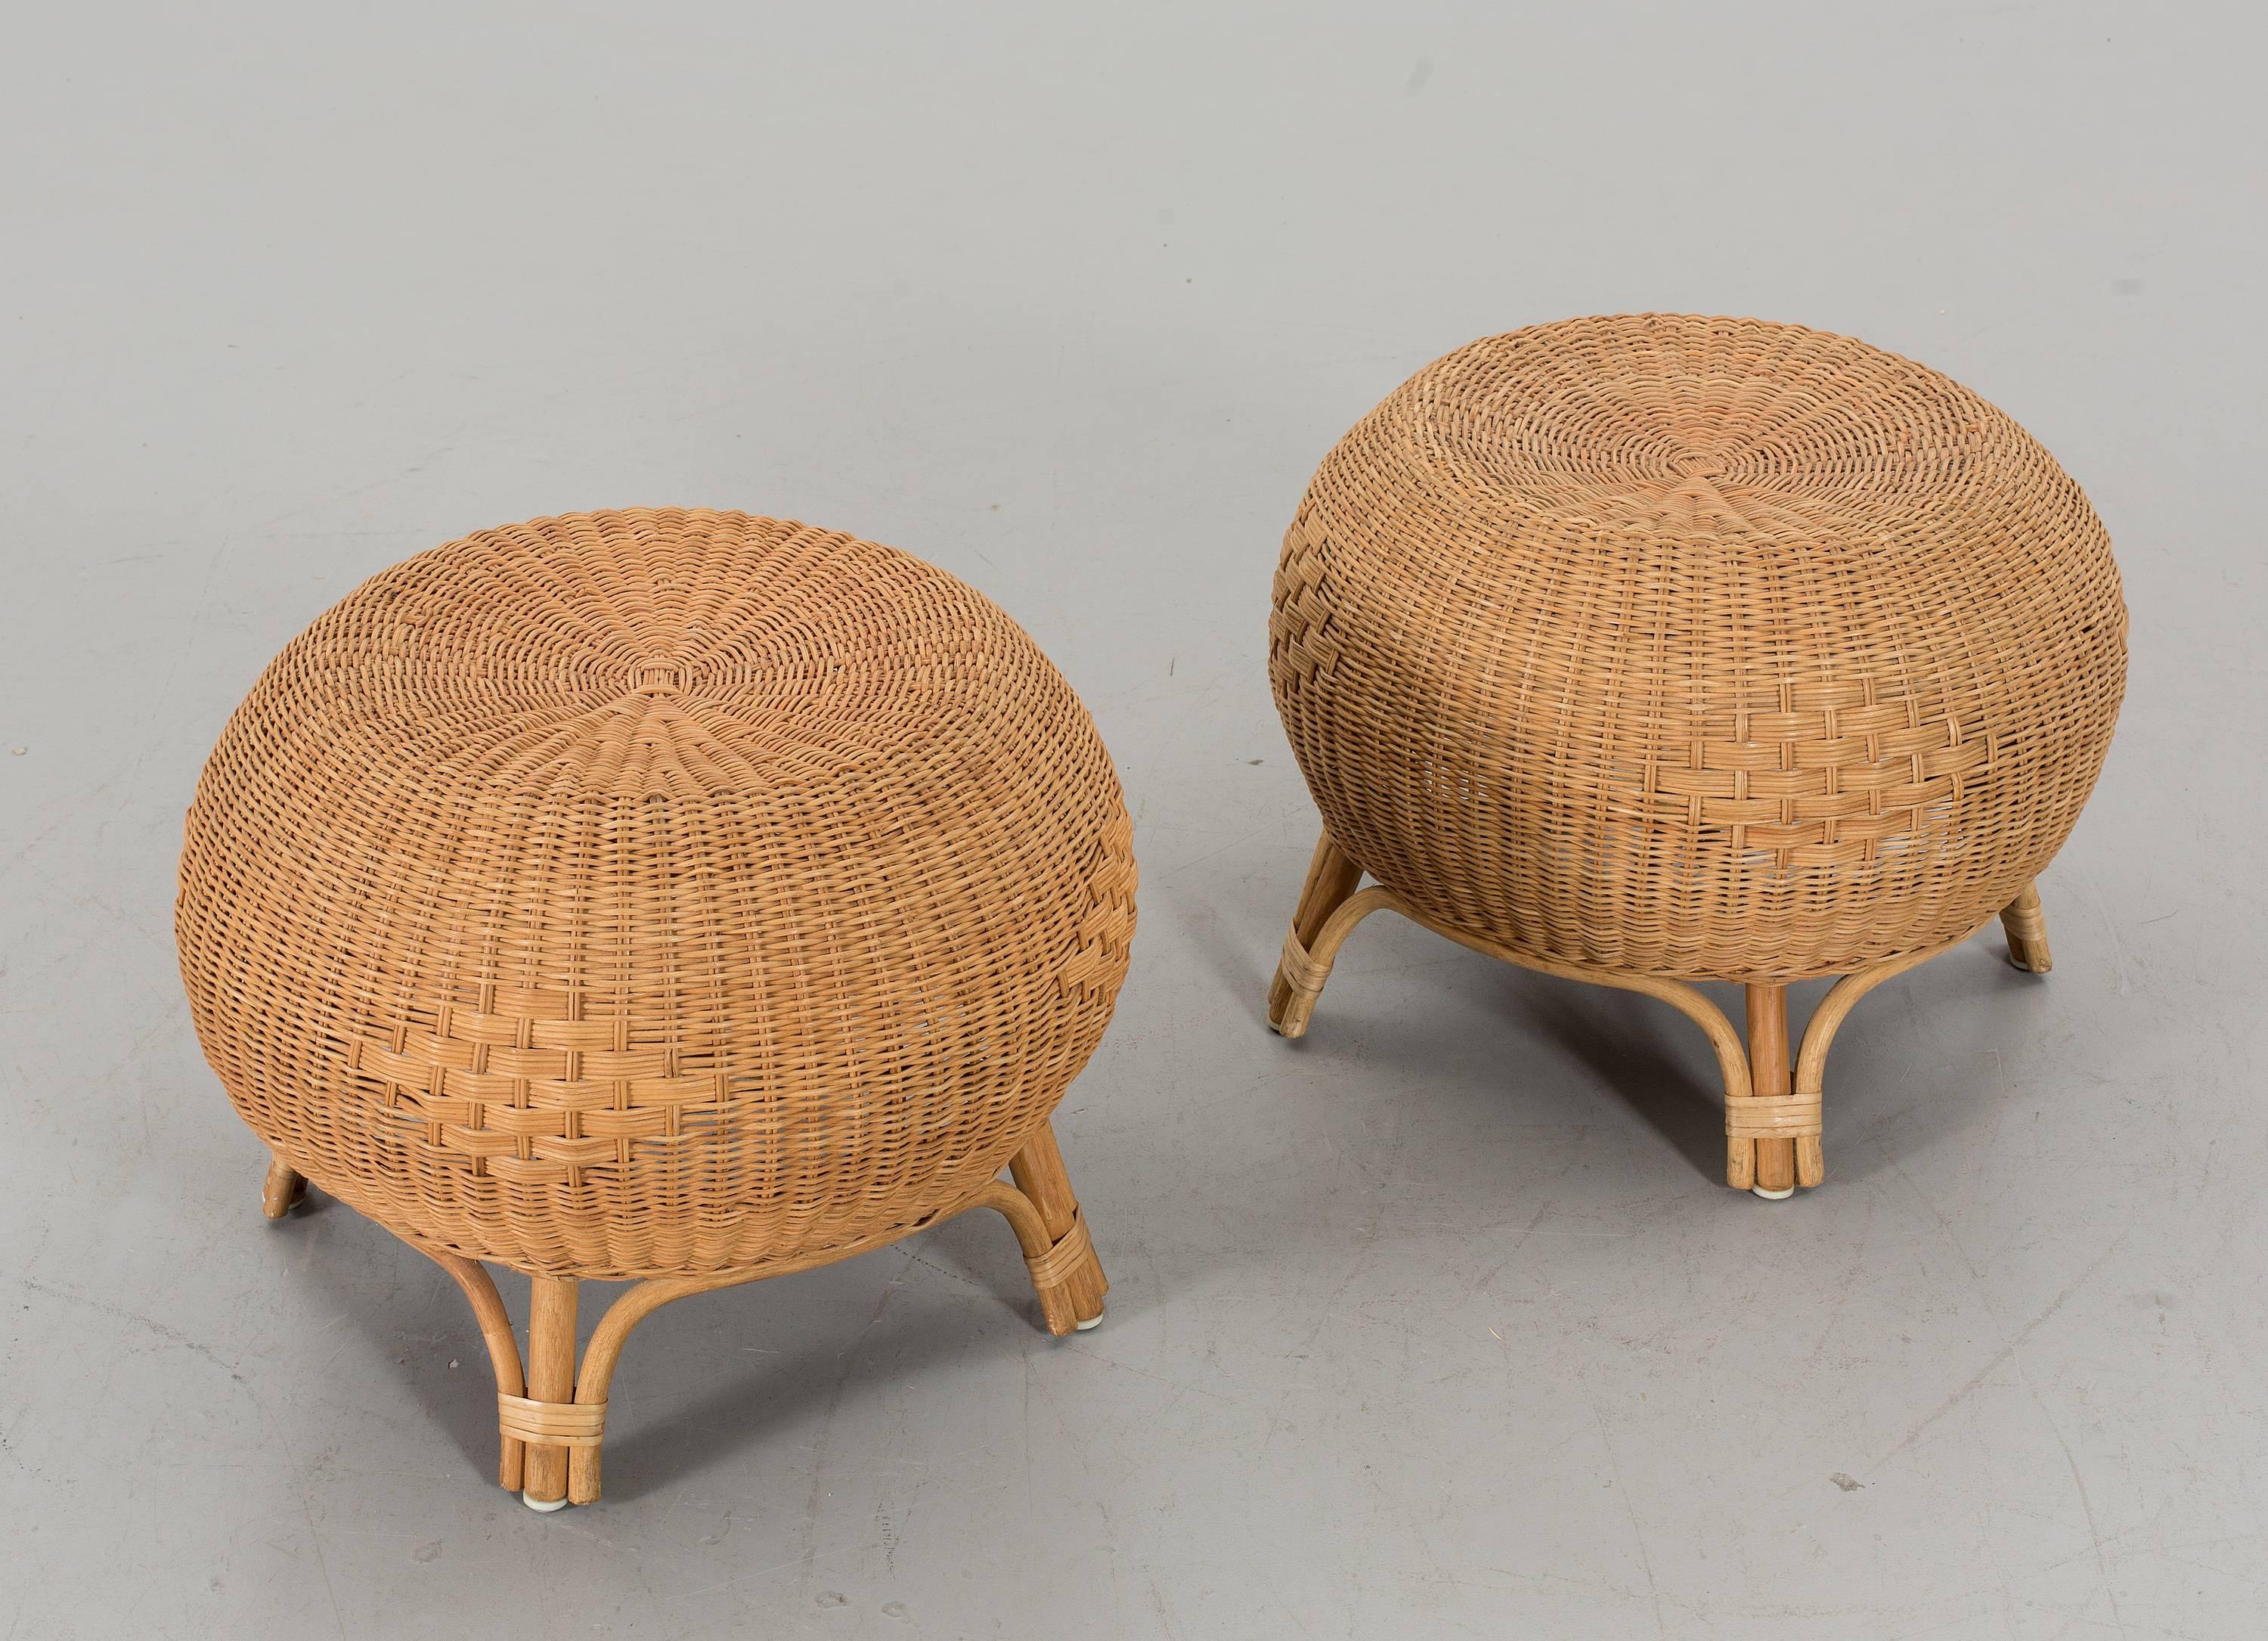 Pair of mid-20th century Scandinavian rounded ottomans or side tables made in bamboo and rattan.